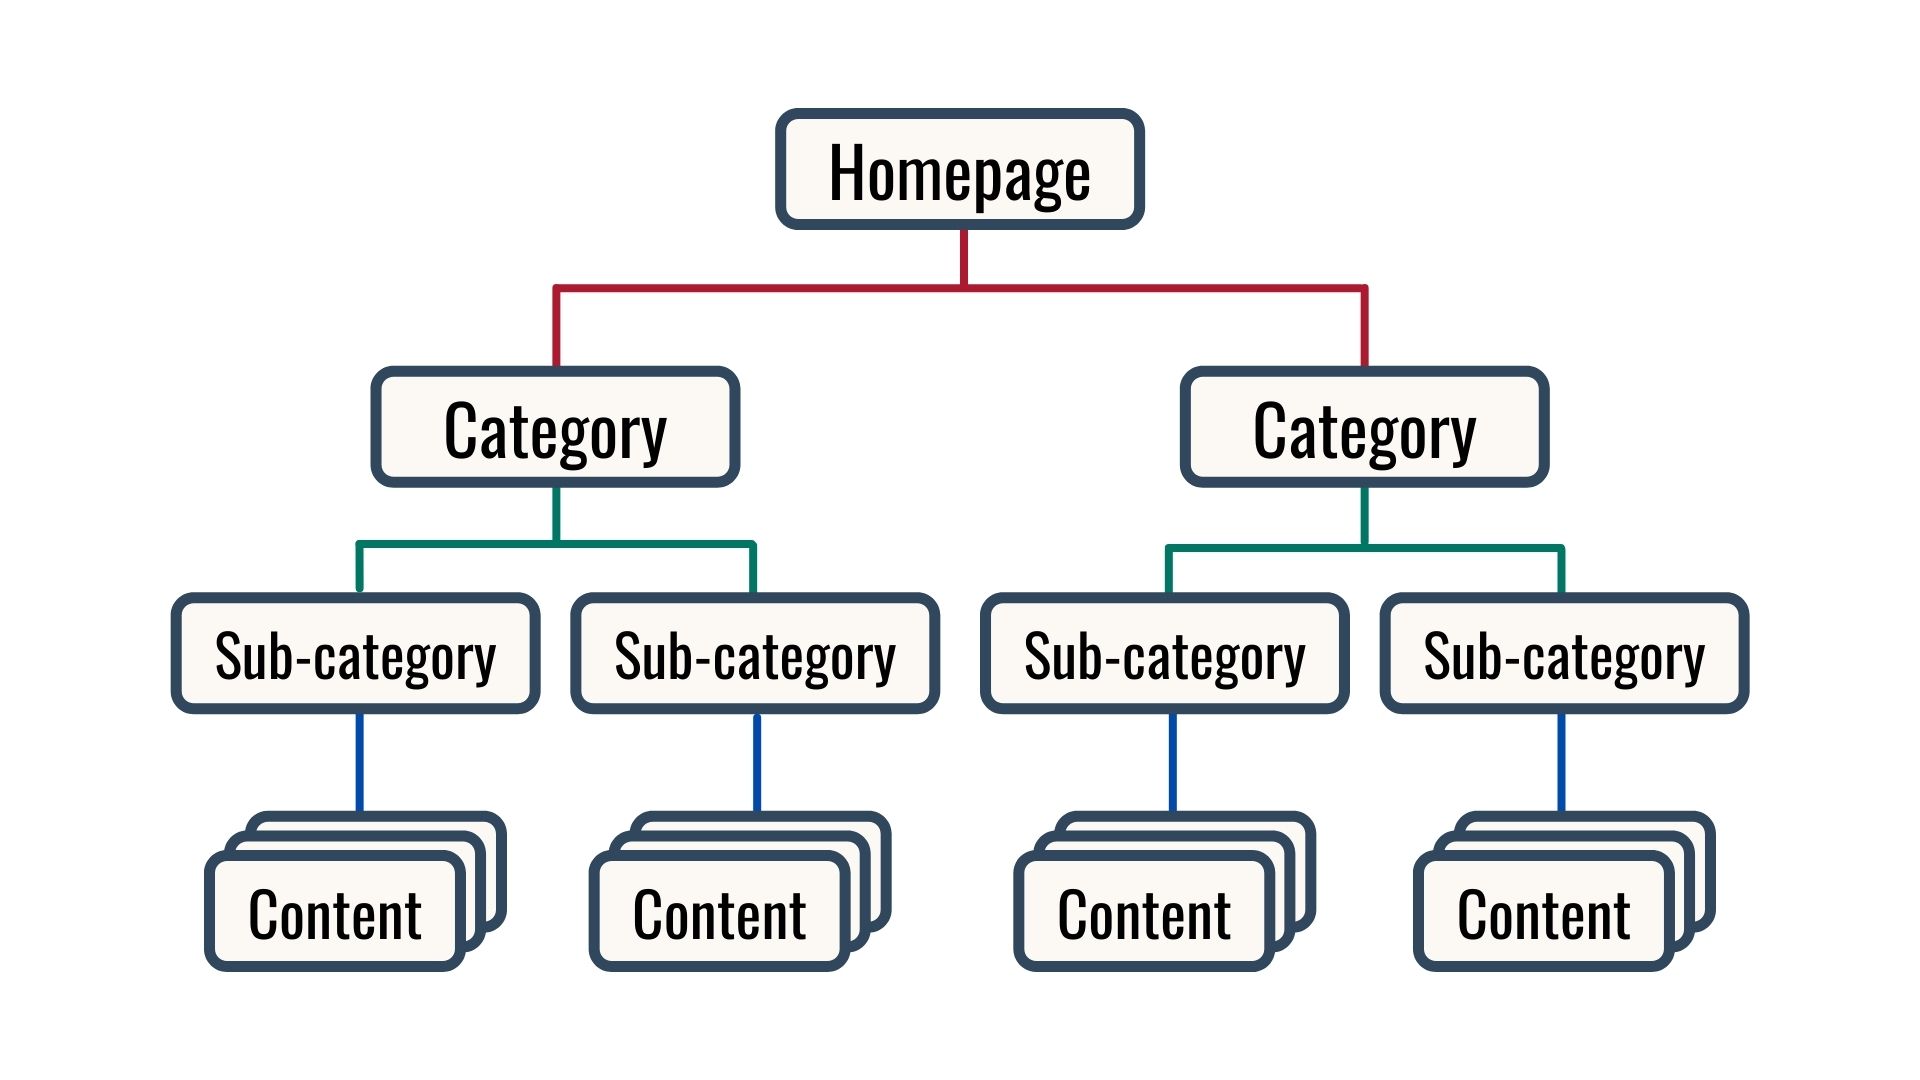 You should always organize and properly group web pages according to relevance. It helps search engines to understand the overall structure of your website and the hierarchy between web pages